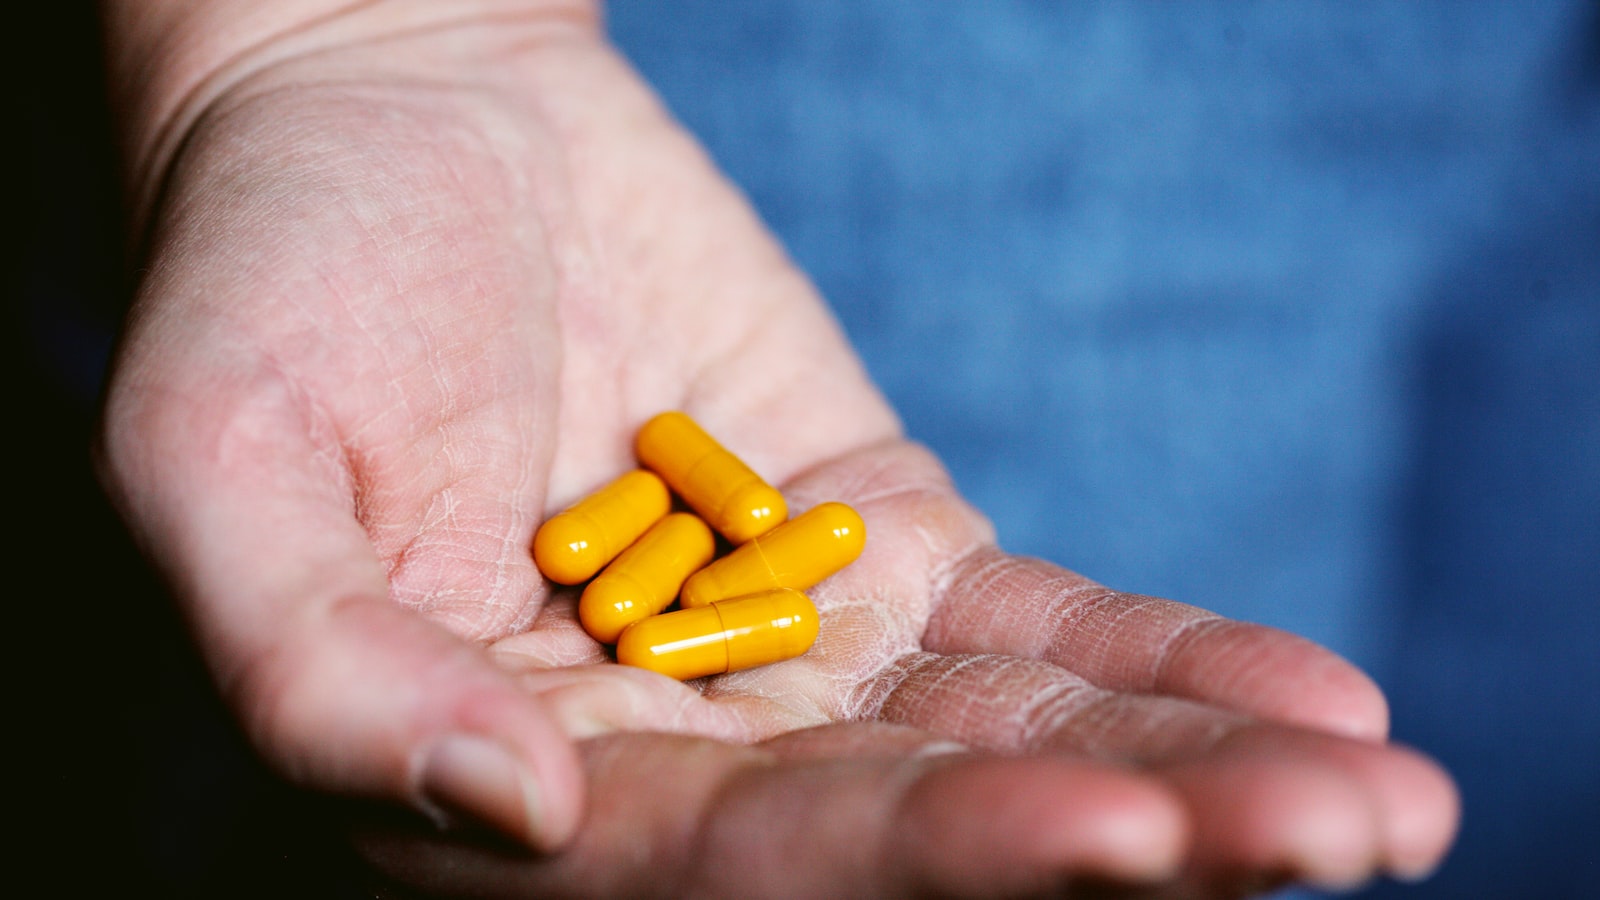 “Managing Mood: Can Supplements Help with Anxiety and Depression?”